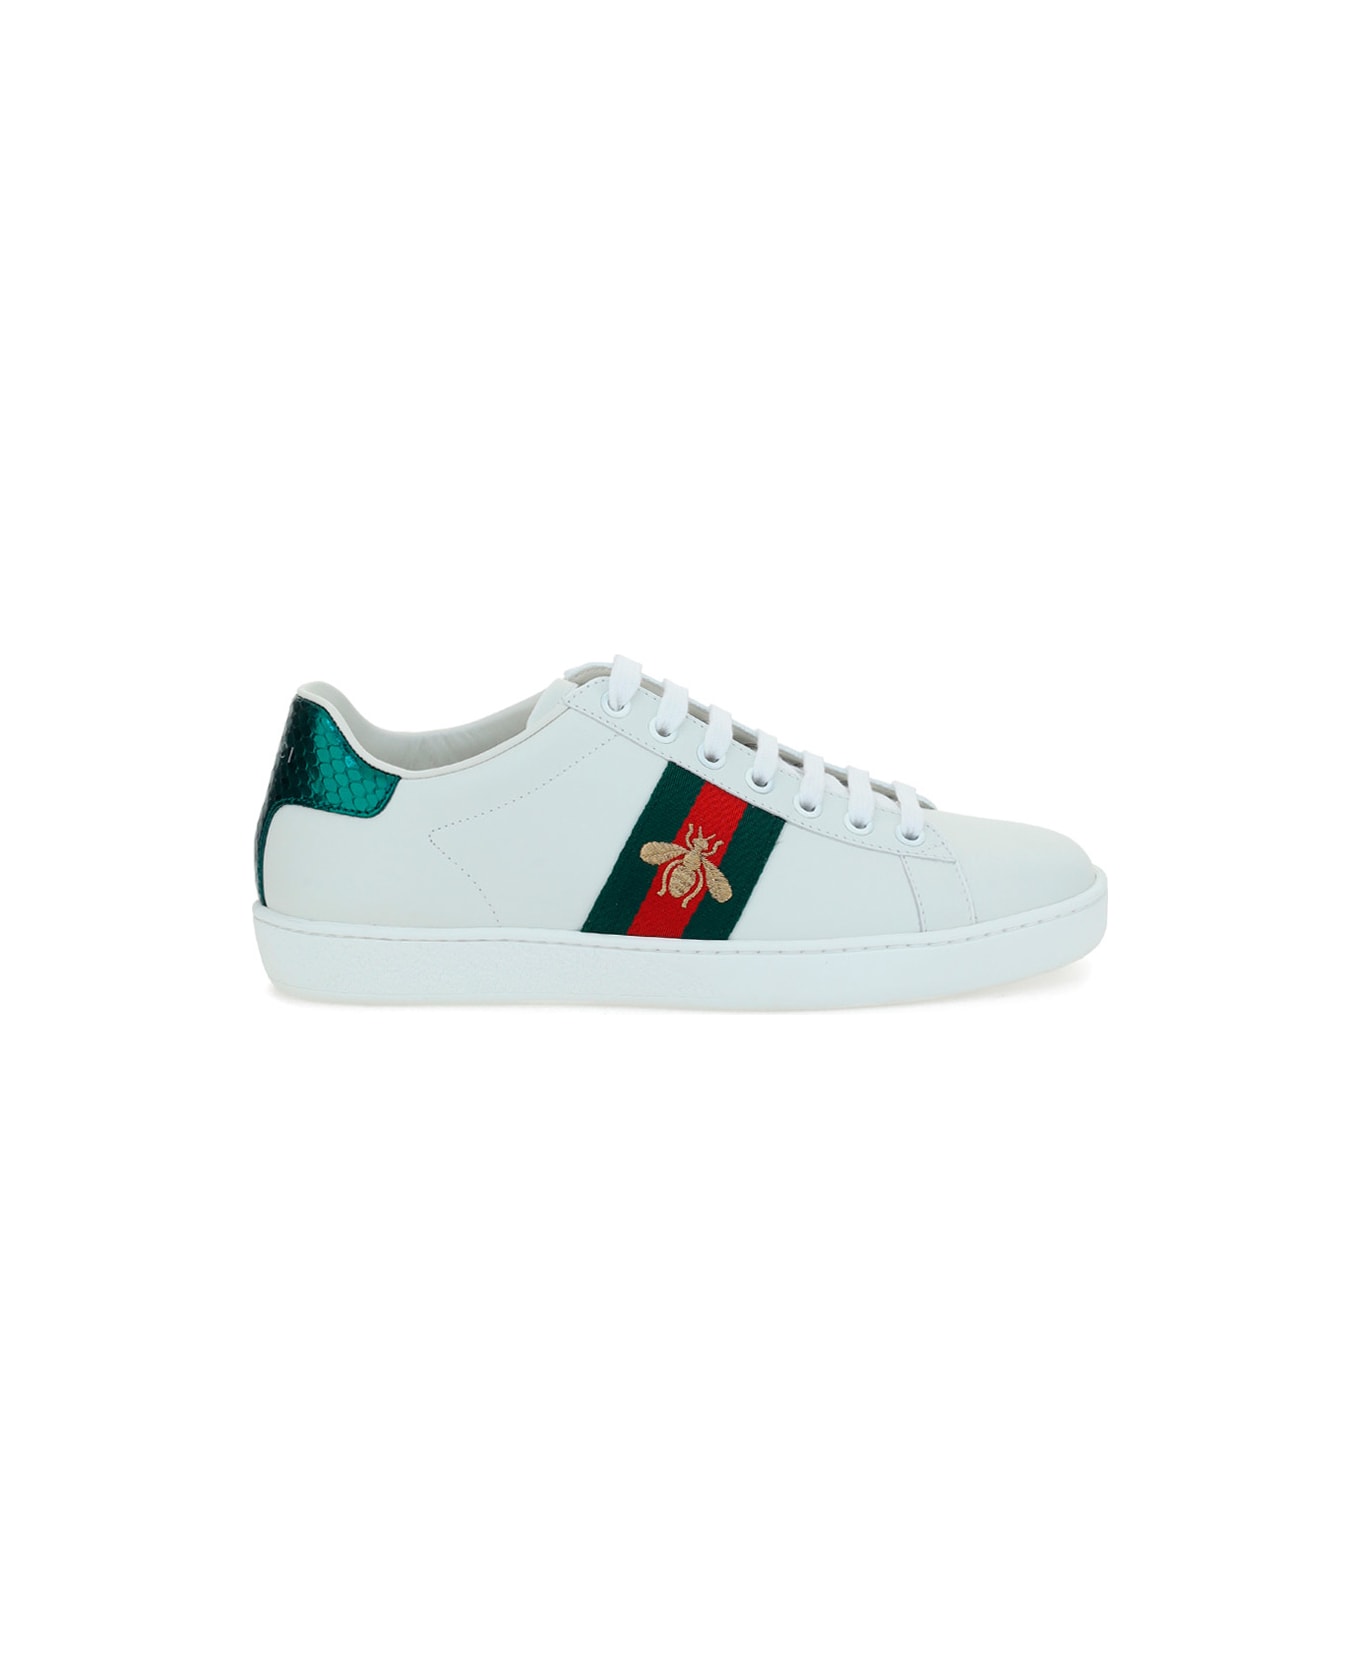 Gucci Sneakers - White スニーカー